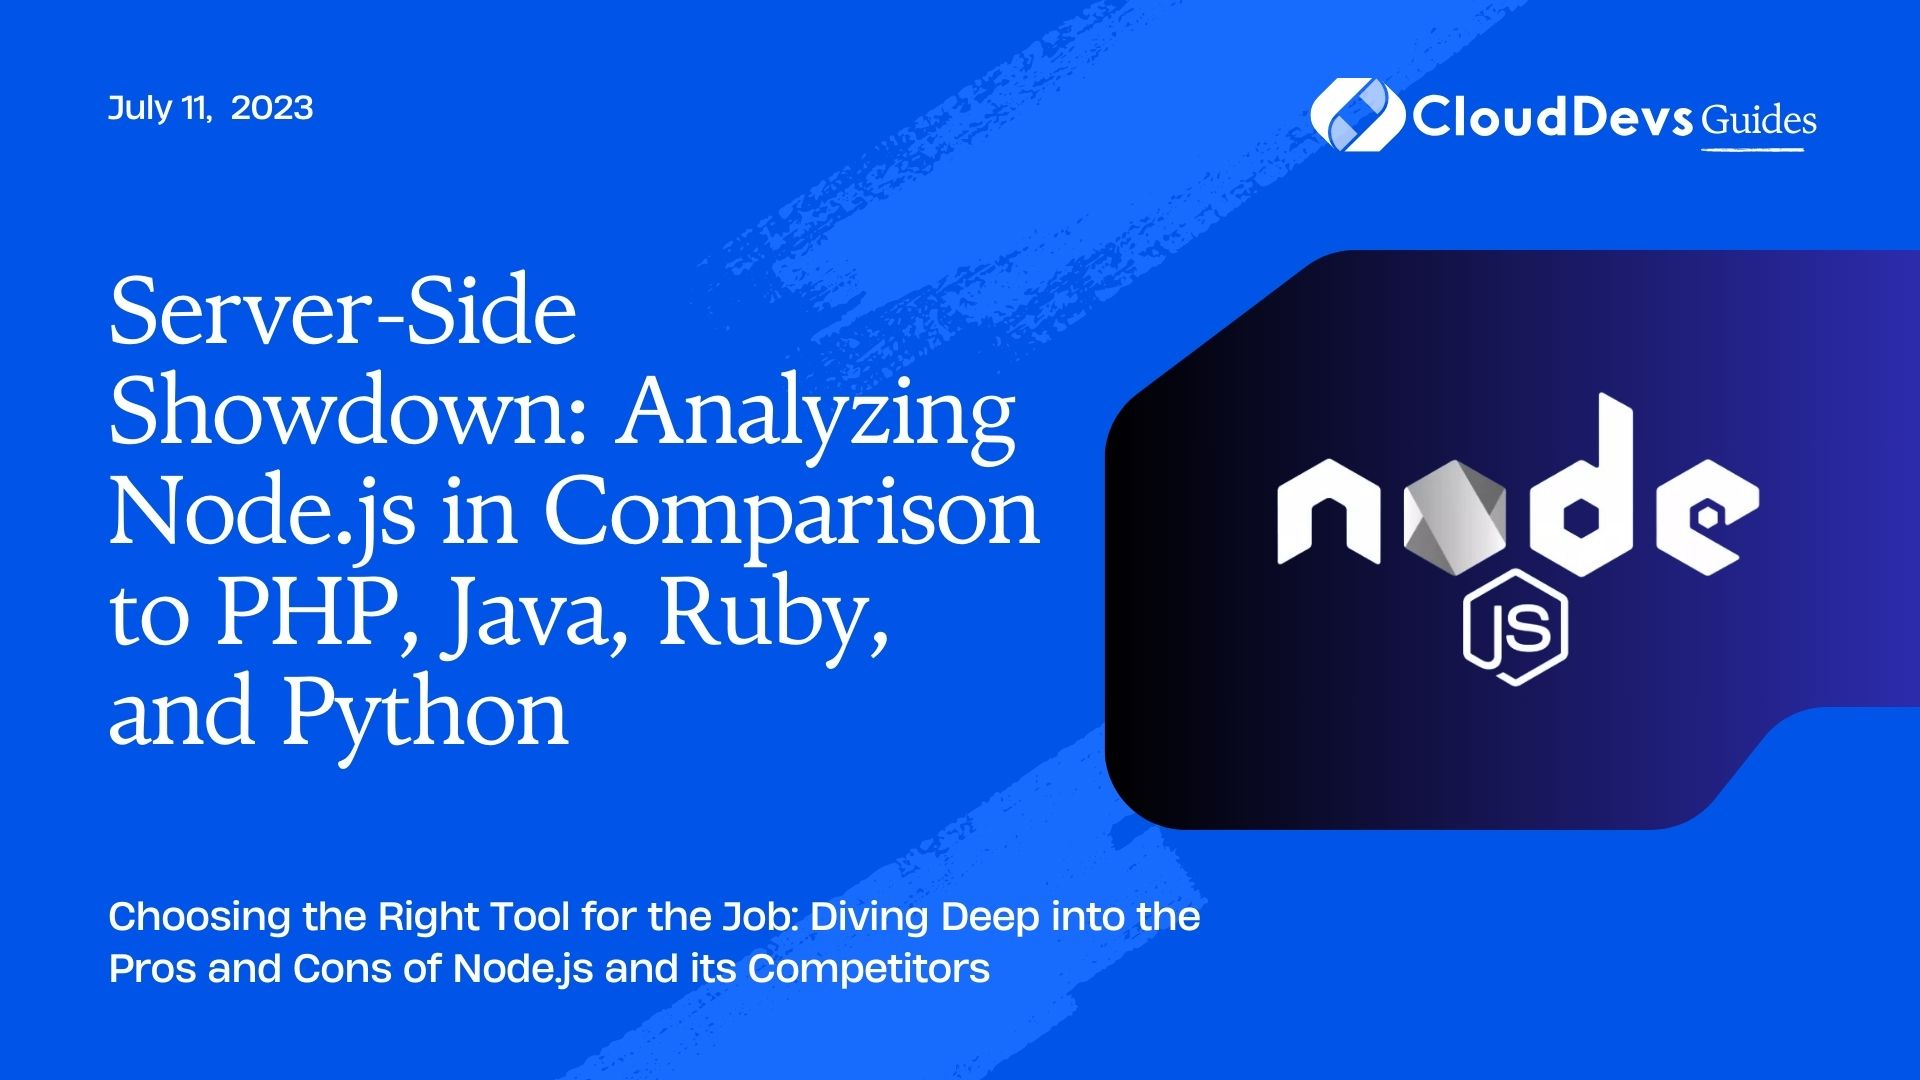 Server-Side Showdown: Analyzing Node.js in Comparison to PHP, Java, Ruby, and Python